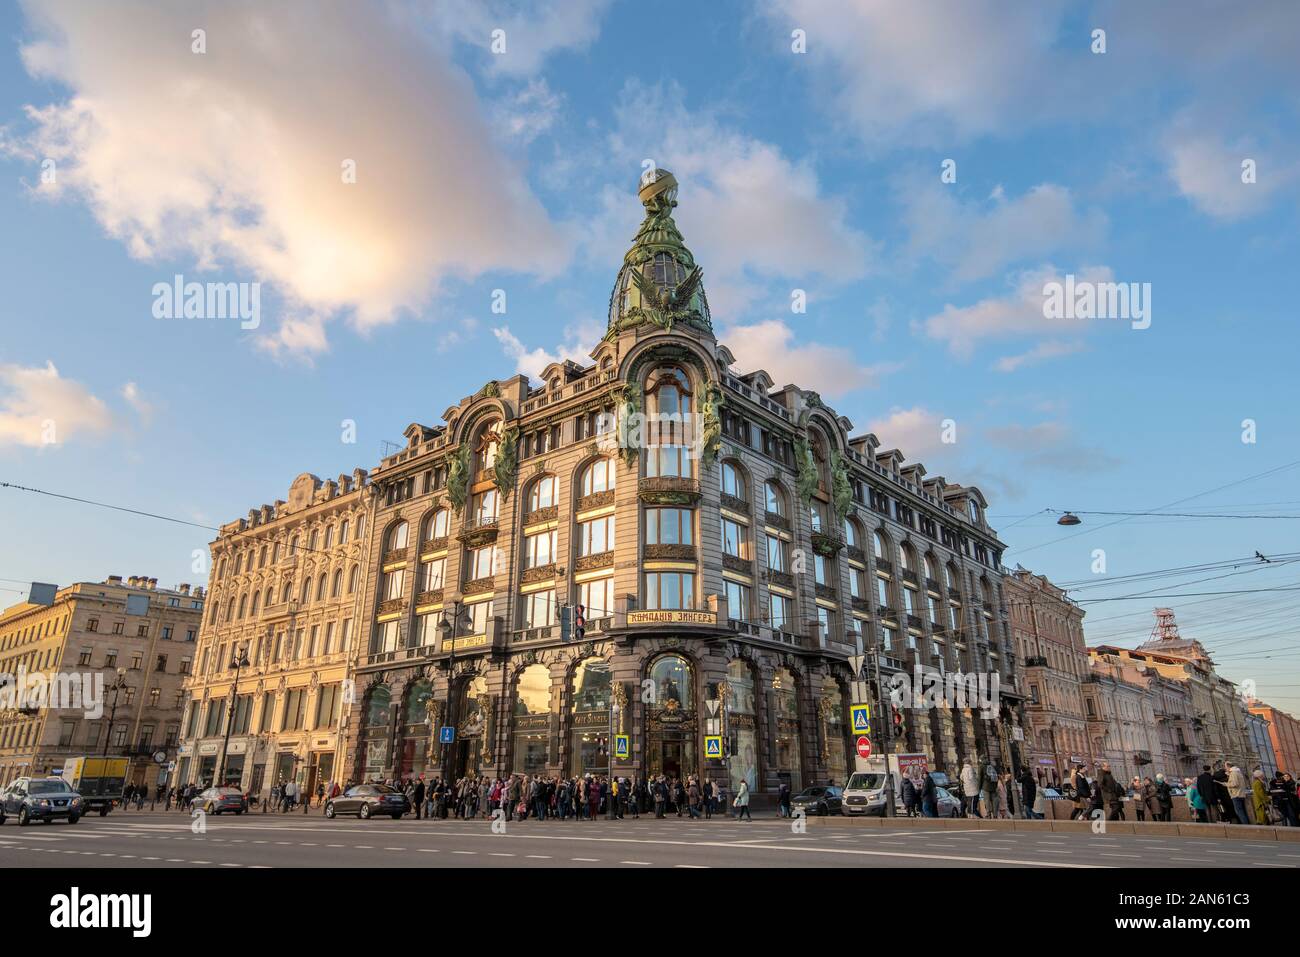 SAINT PETERSBURG. RUSSIA - Former Singer house - house of books (Russian: Dom Knigi) at Nevsky prospect at day Stock Photo